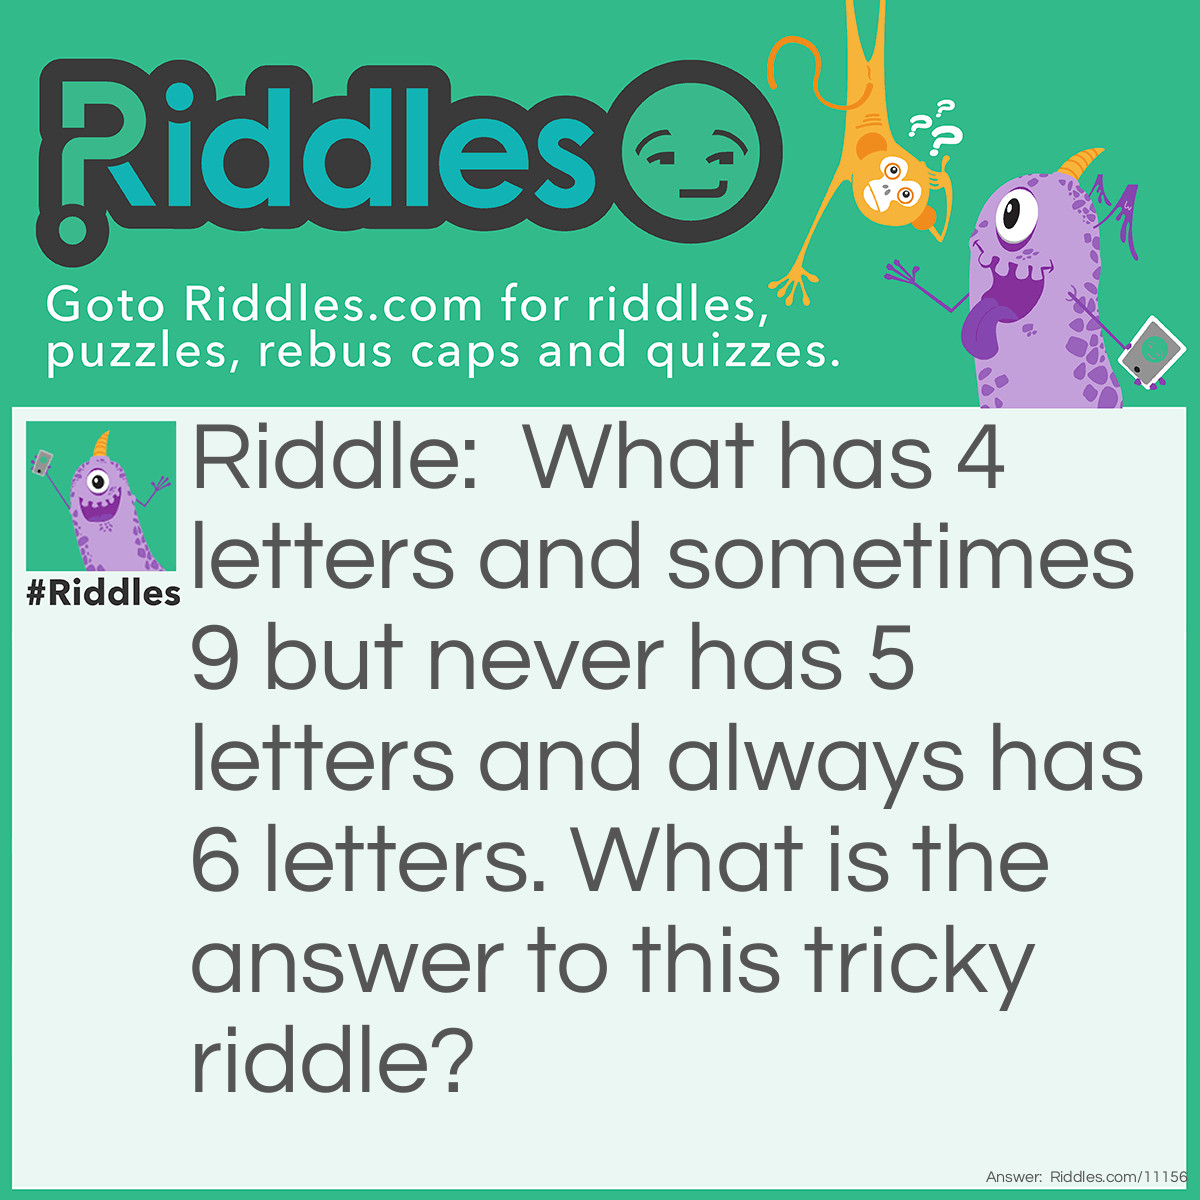 Riddle: What has 4 letters and sometimes 9 but never has 5 letters and always has 6 letters. What is the answer to this <a href="/difficult-riddles">tricky</a> riddle? Answer: "What" has 4 letters.
"Sometimes" has 9 letters.
"Never" has 5 letters.
"Always" has 6 letters.